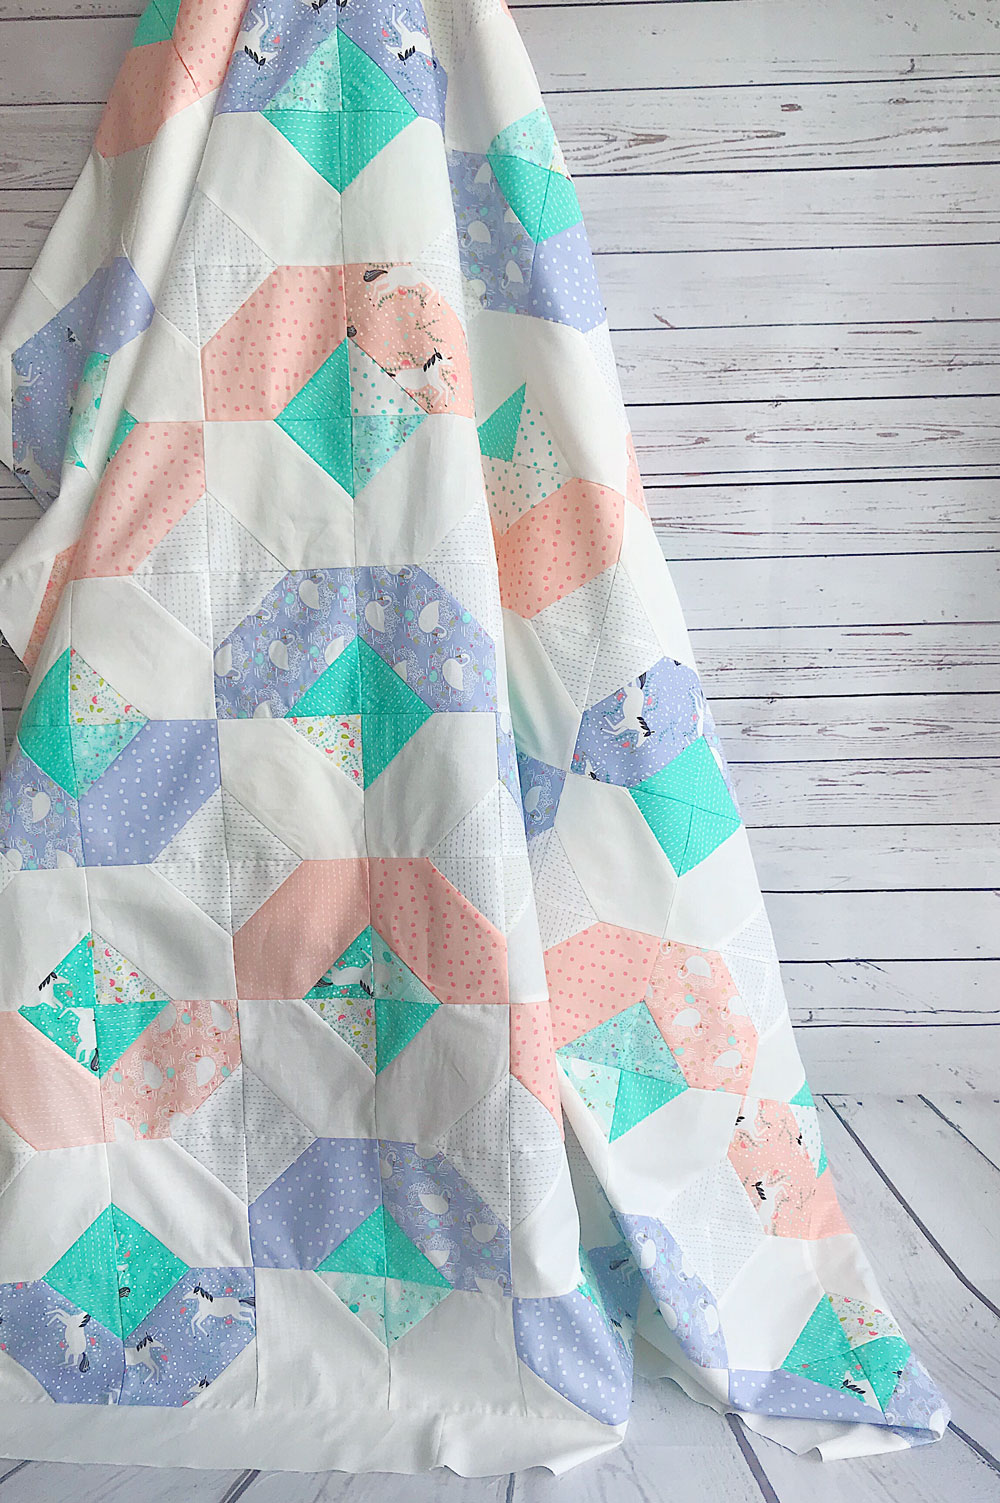 This Peach and Periwinkle Glitter quilt is so cute! Featuring ponies, swans, and sweet little flowers.